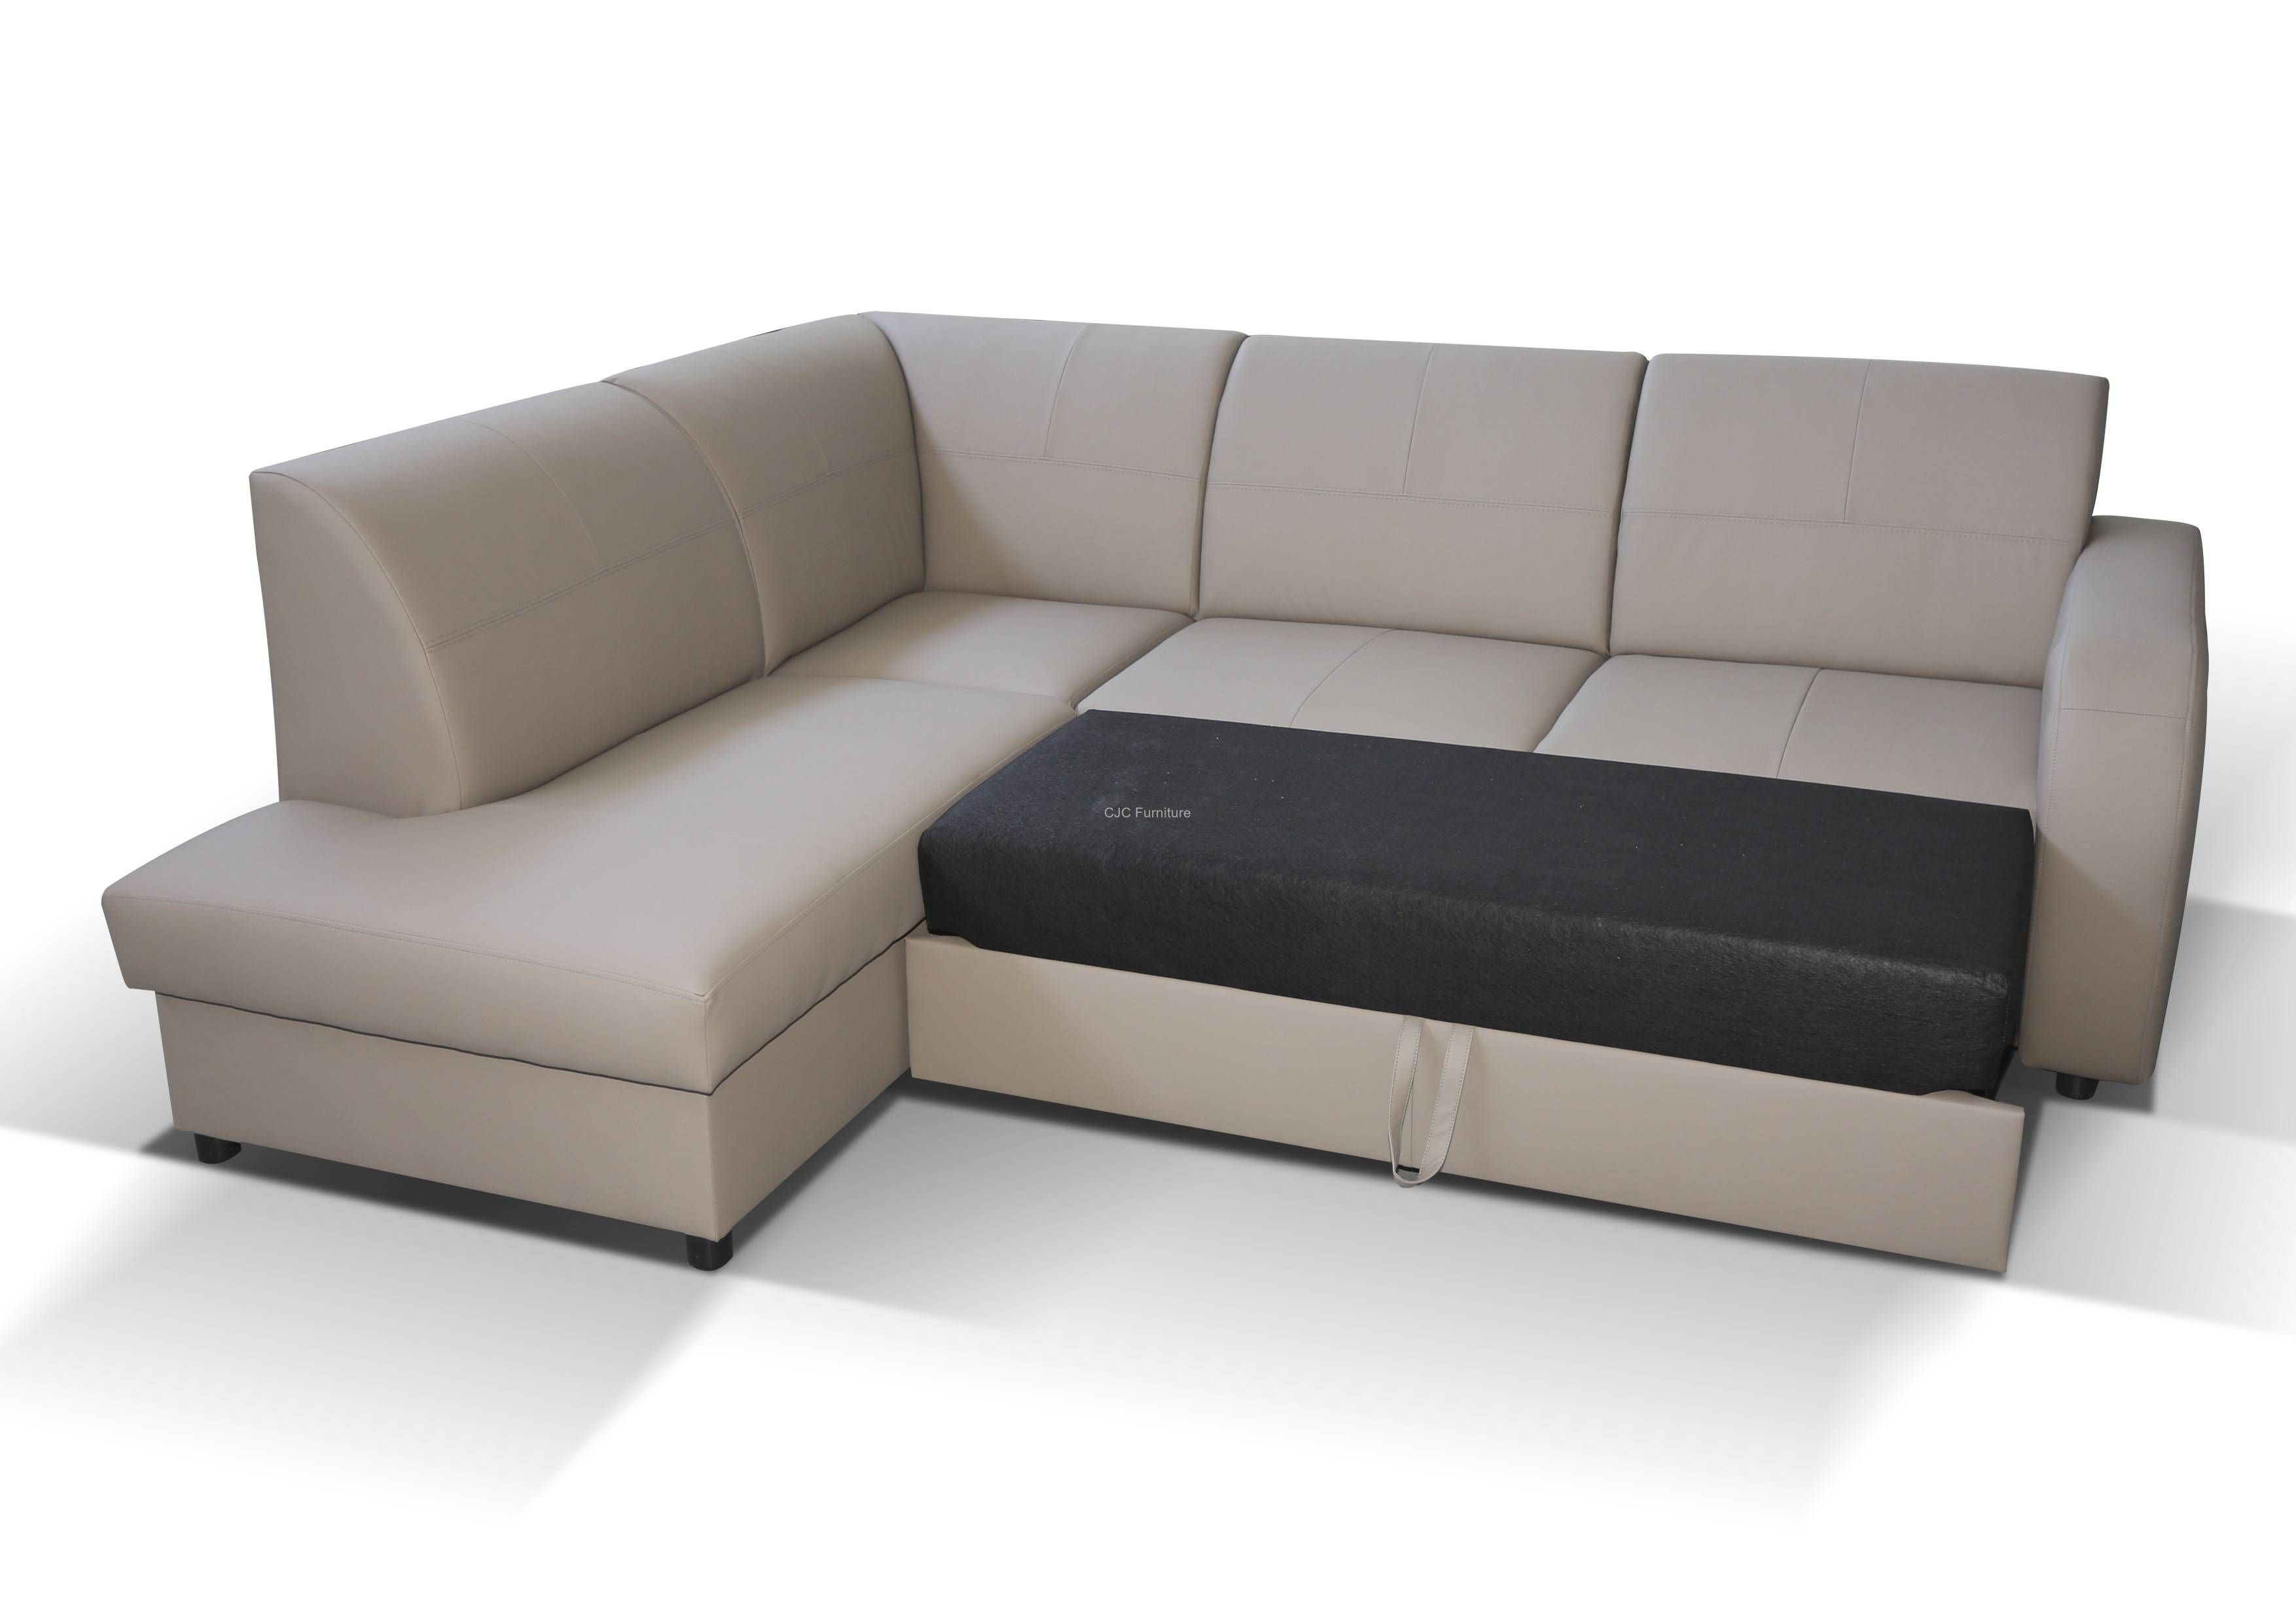 Sofas Center : Formidable Corner Sofa Picture Ideas Beds Uk Cheap In Cheap Corner Sofas (View 7 of 30)